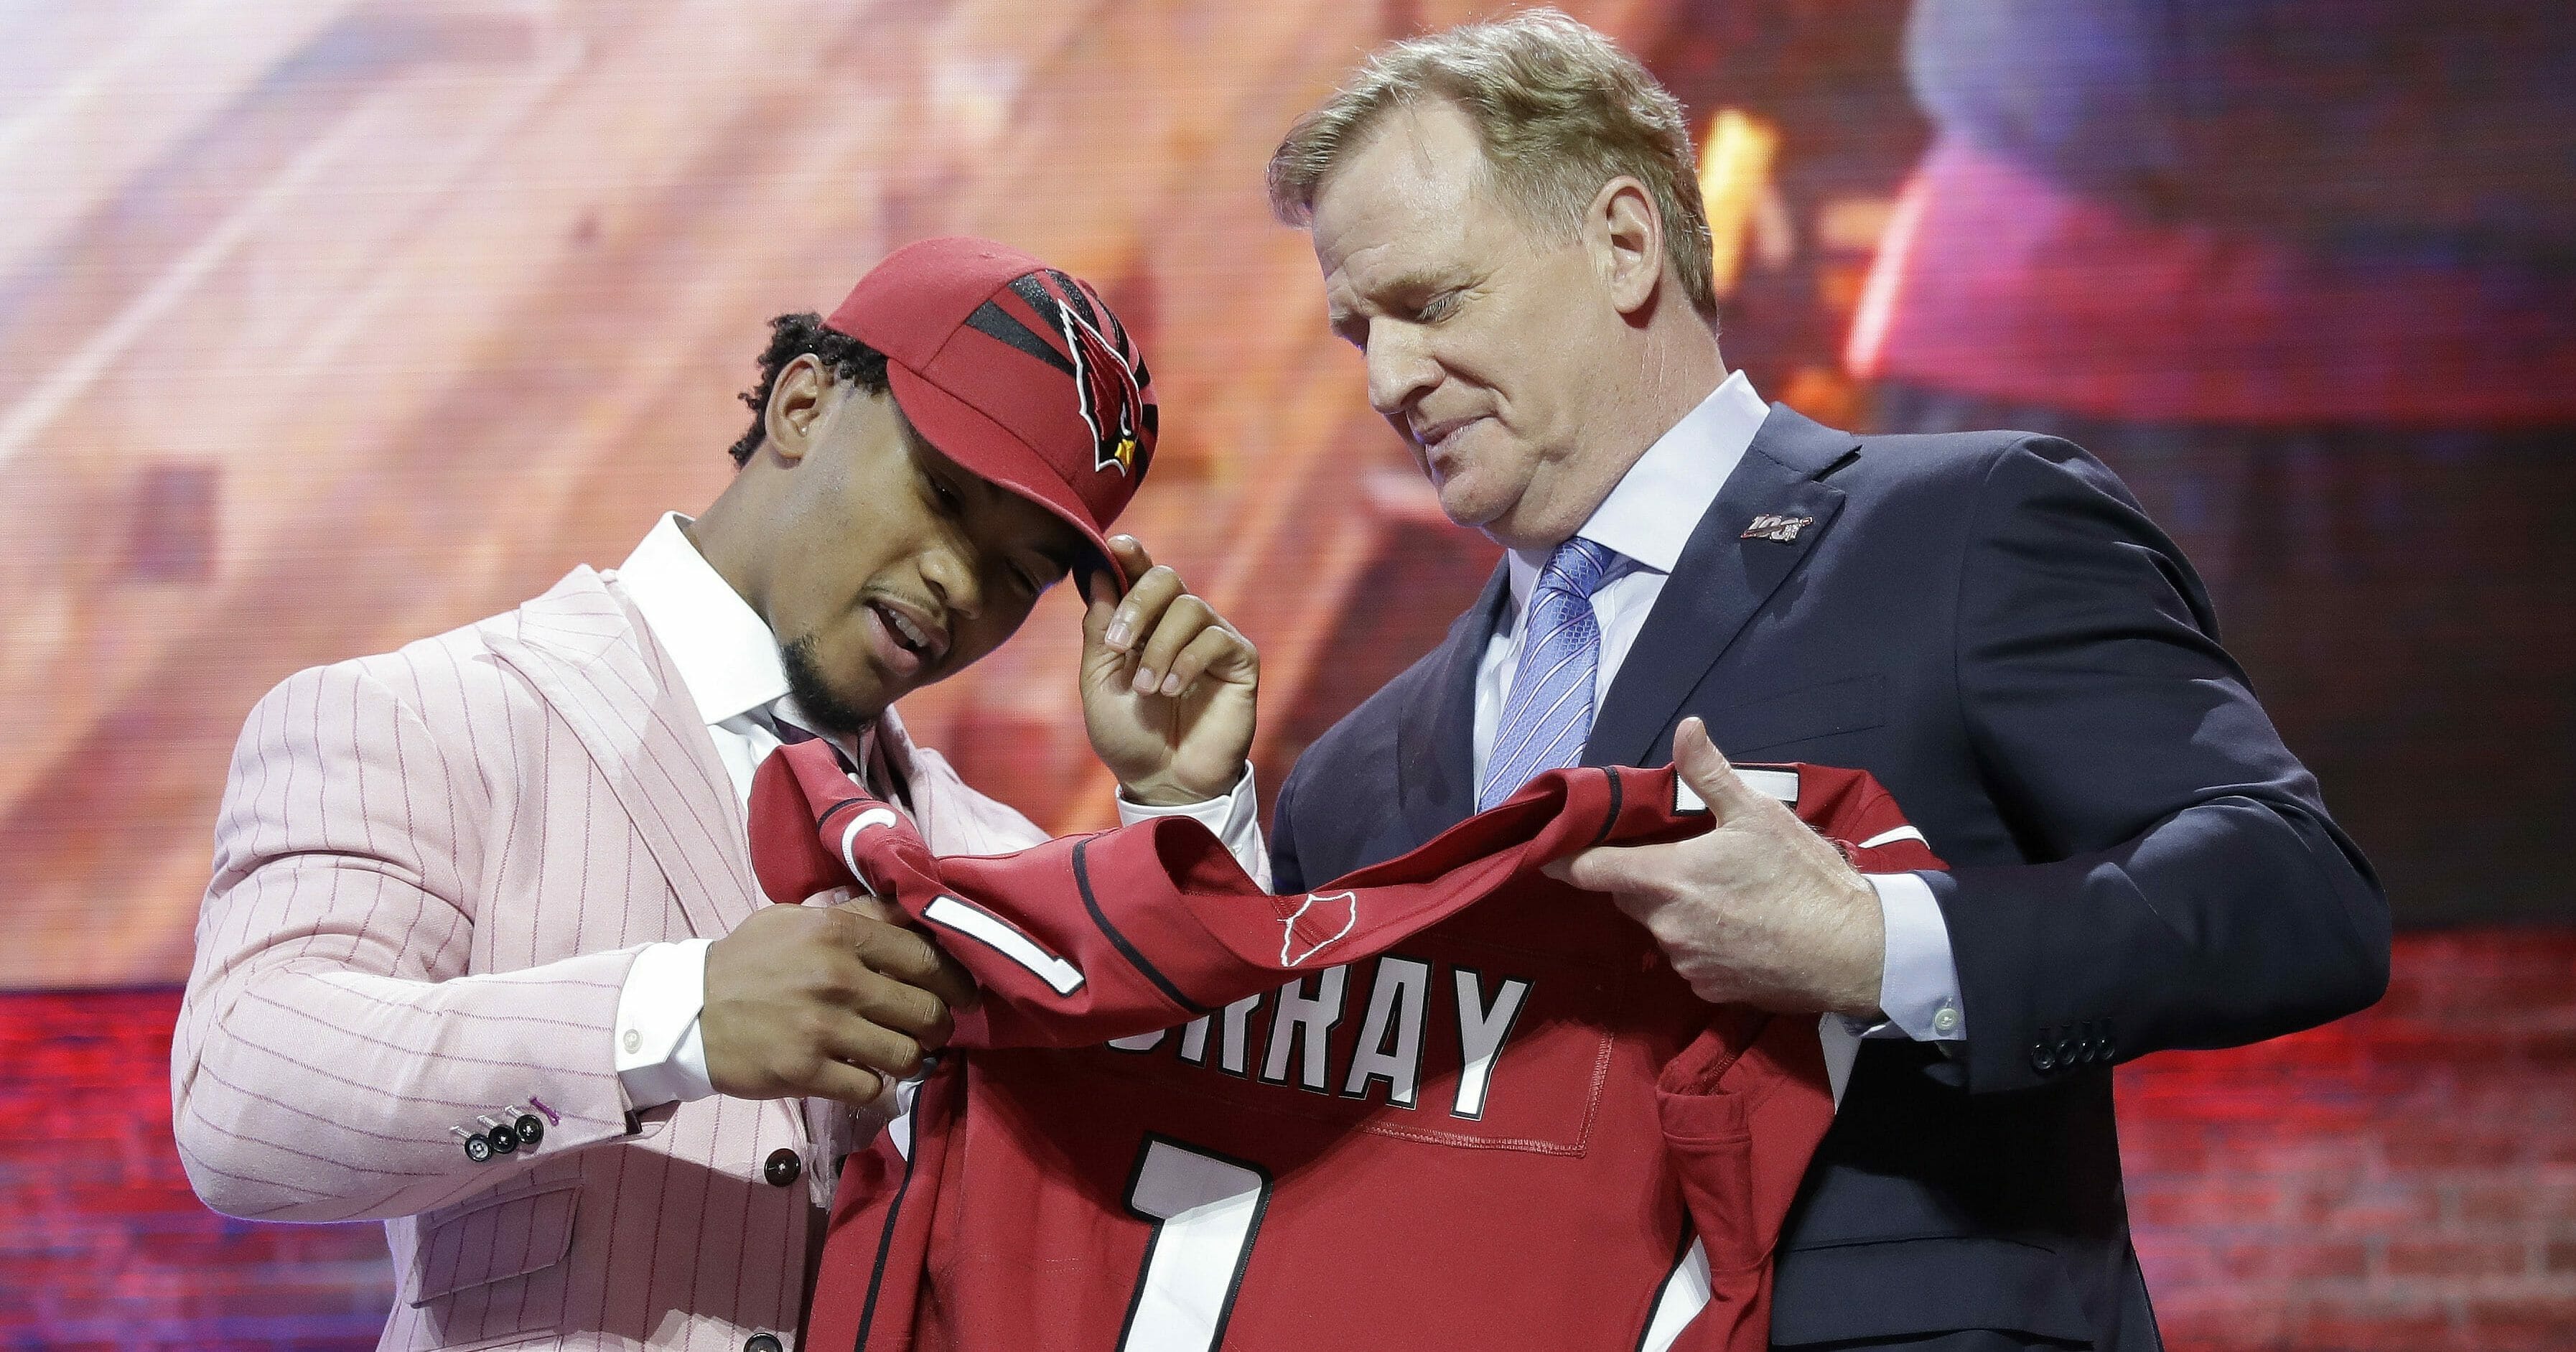 Oklahoma quarterback Kyler Murray poses with NFL Commissioner Roger Goodell after the Arizona Cardinals selected Murray in the first round at the NFL football draft, Thursday, April 25, 2019, in Nashville, Tenn.